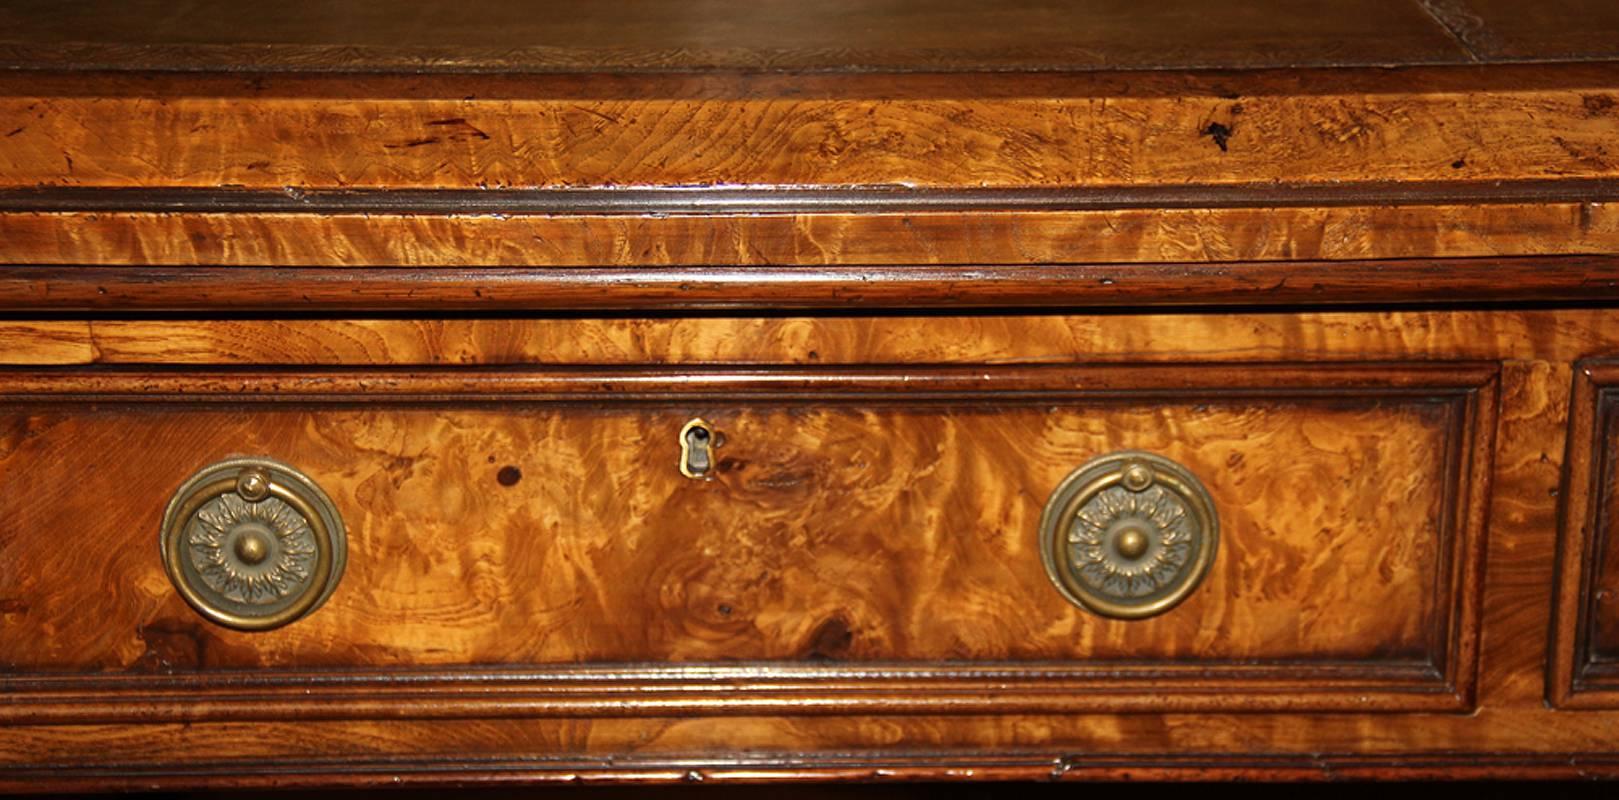 A 19th century English Regency burl elmwood and parcel-gilt partners desk, the later C. Mariani leather writing surface embossed above six drawers (three on each side) and raised on splayed legs terminating on brass caster feet connected by a turned